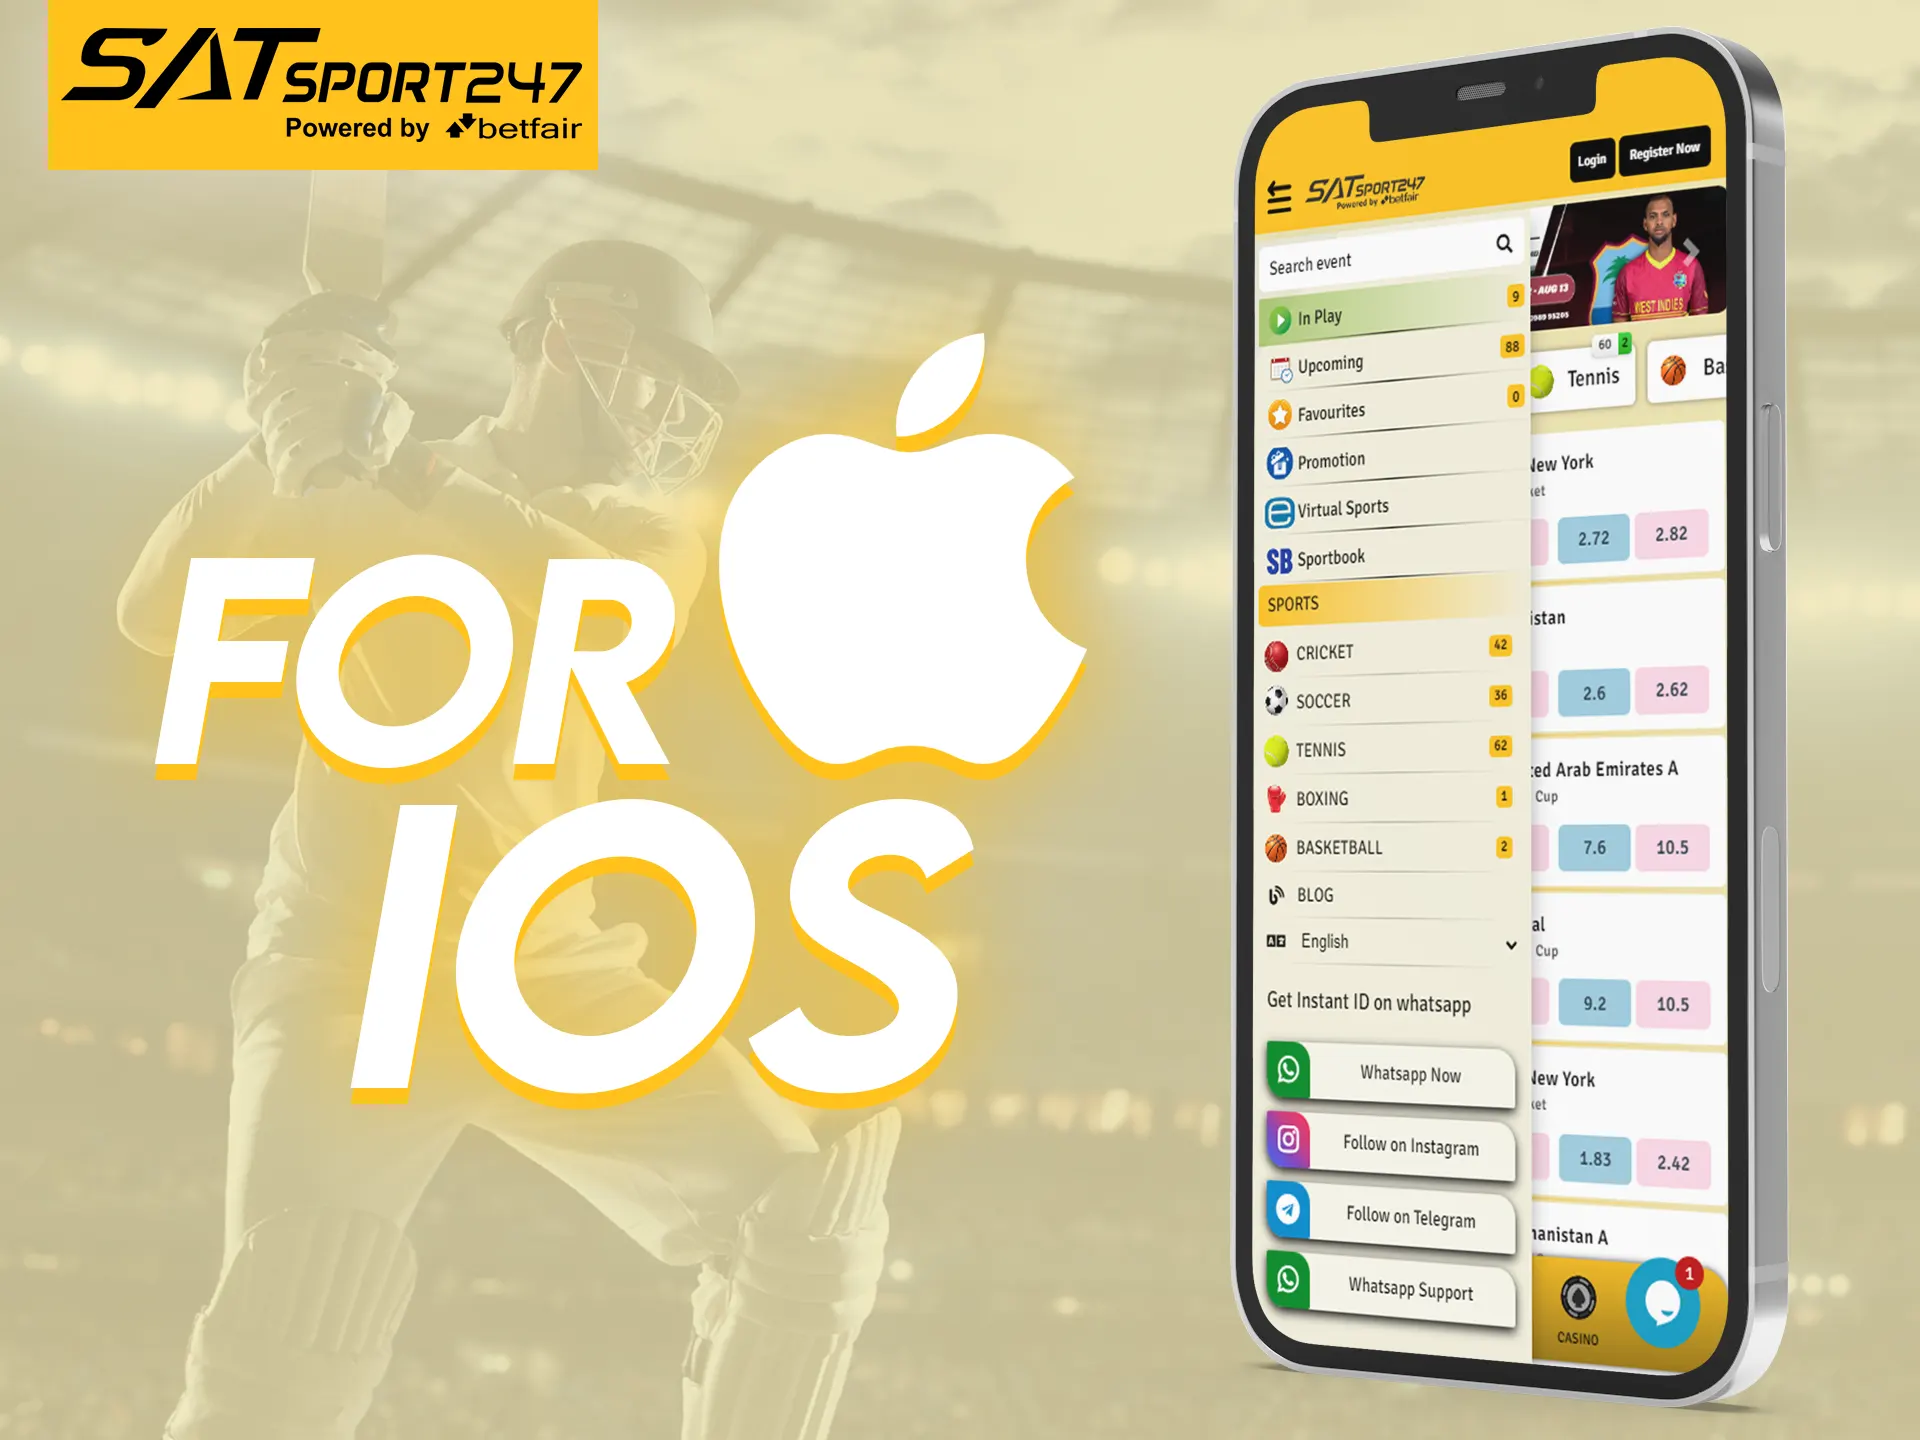 With Satsport247 you can place bets on your iOS phone.